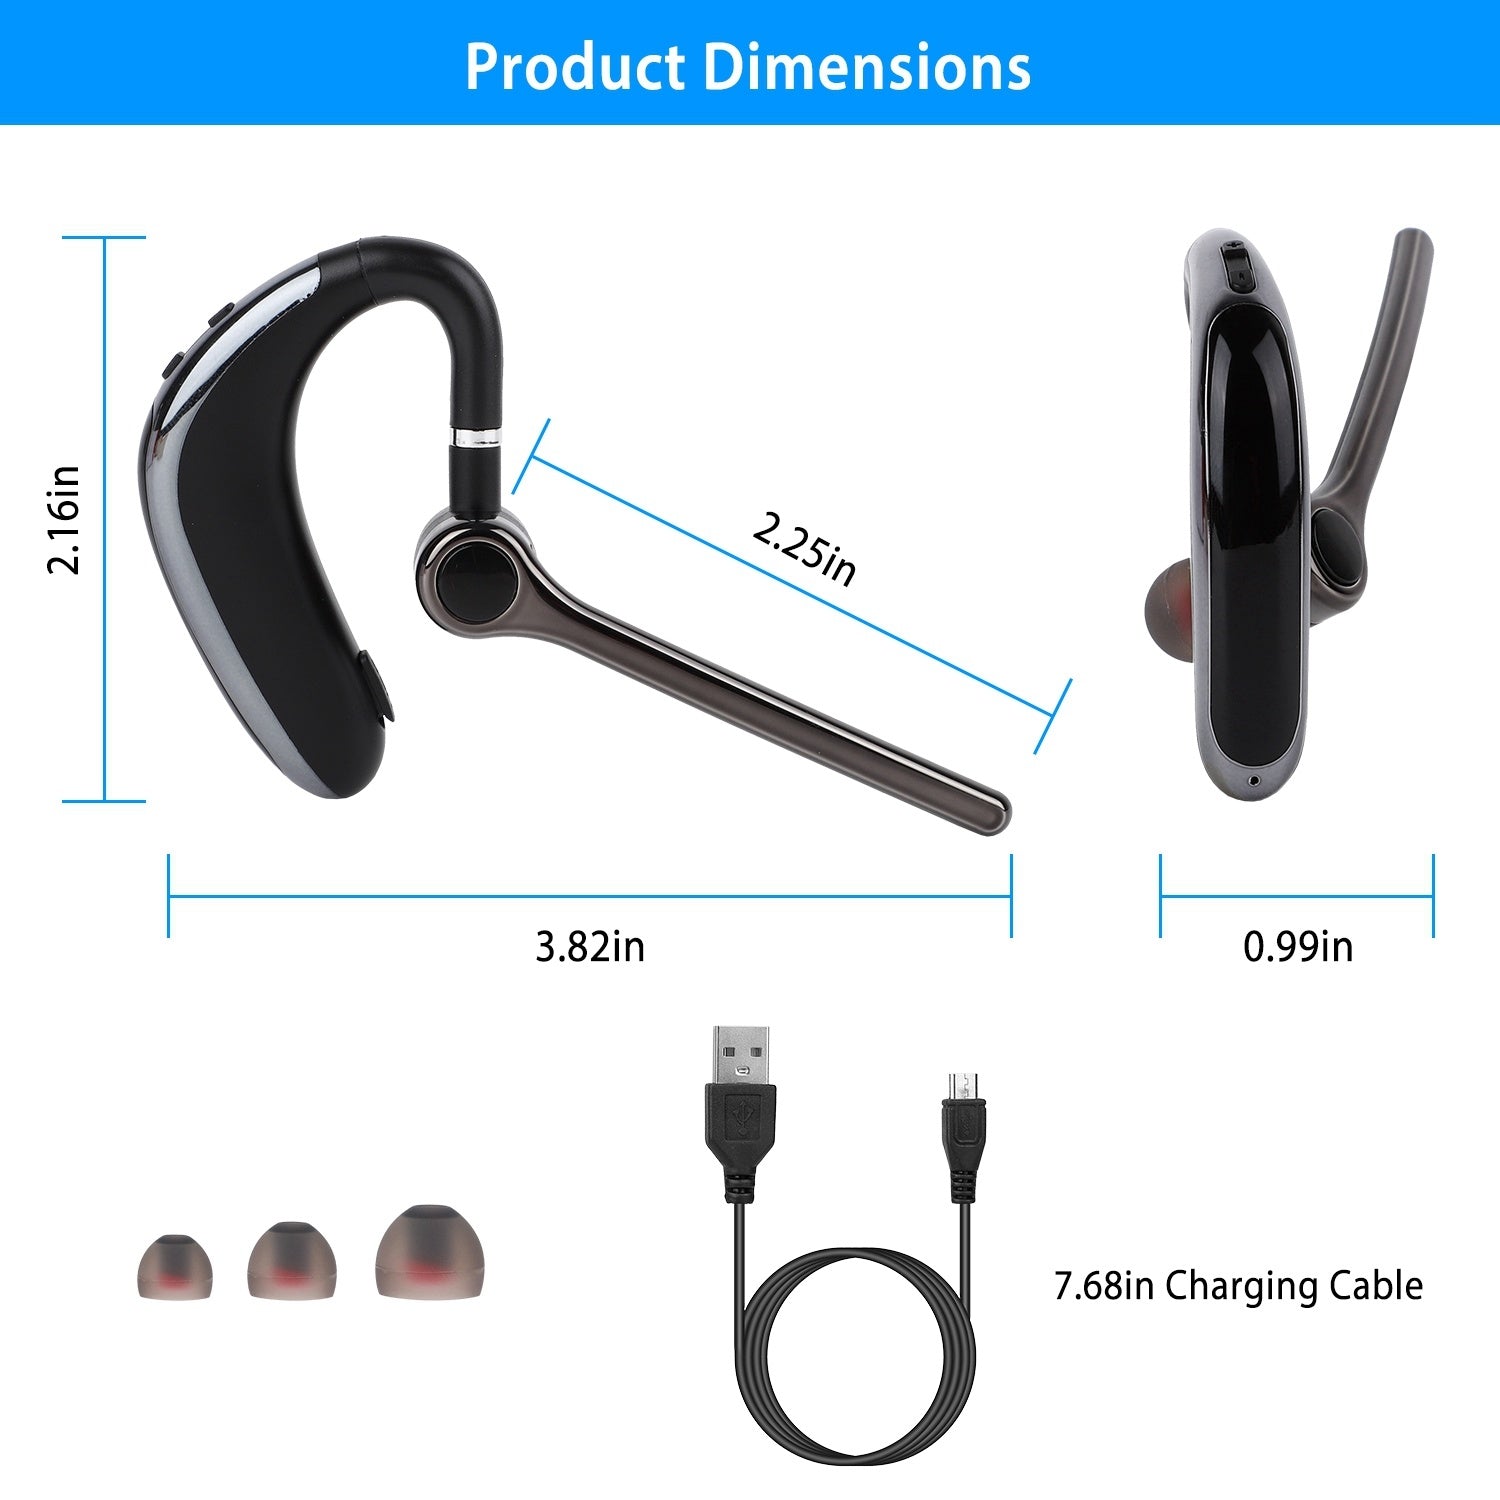 180° Rotatable Wireless V5.0 ENC Driving Earbuds, measurements 